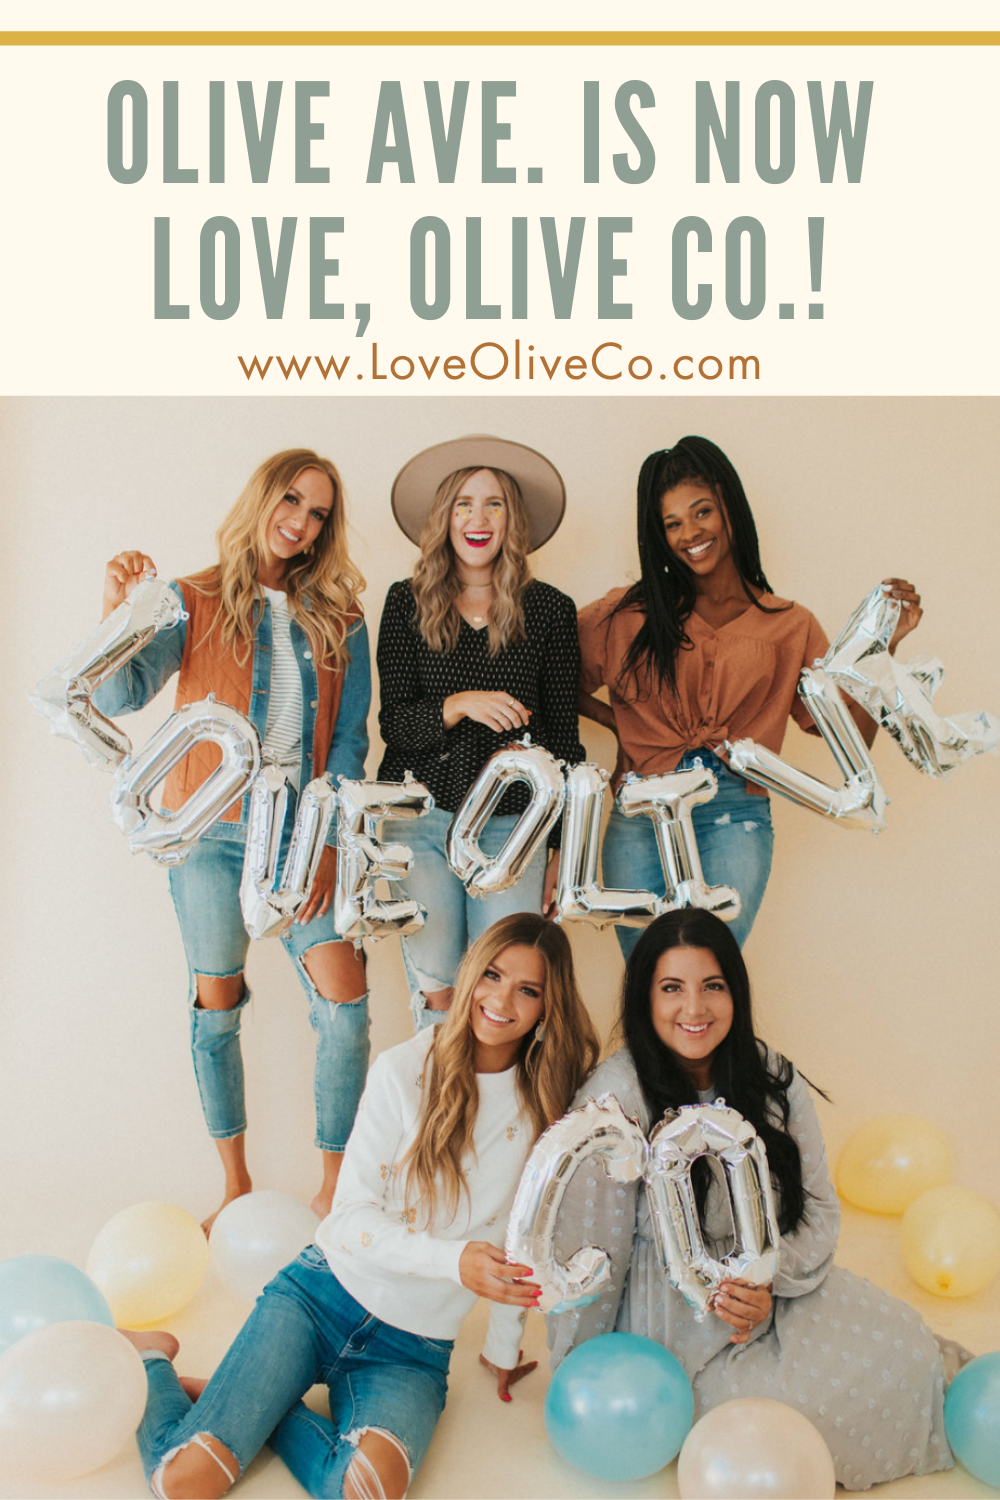 Olive Ave. is Now Love, Olive Co.! www.www.loveoliveshop.com